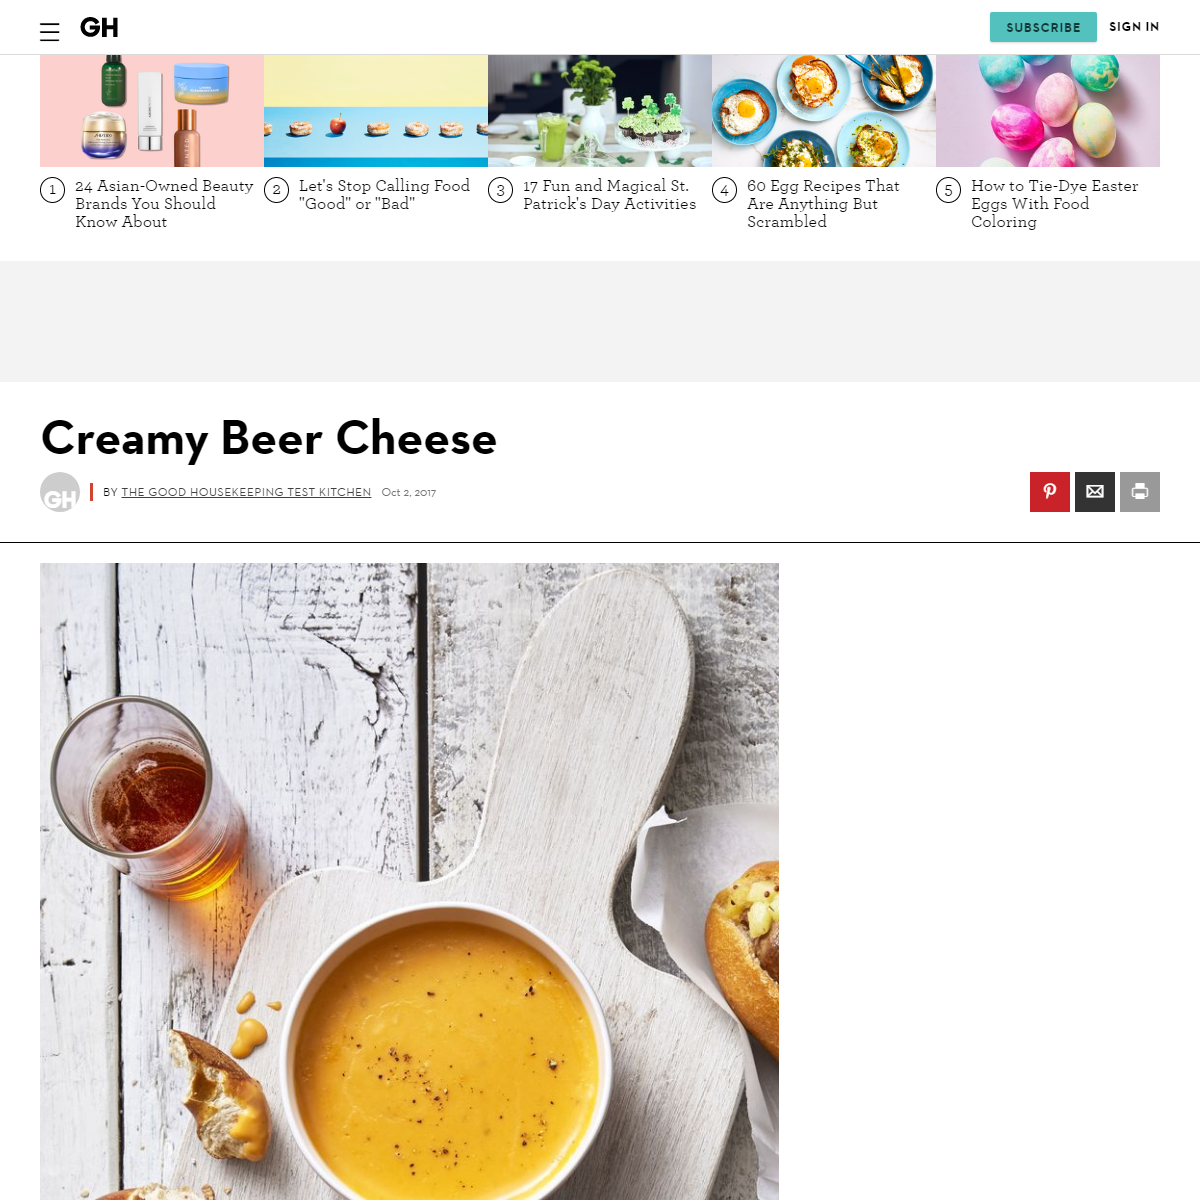 A complete backup of https://www.goodhousekeeping.com/food-recipes/party-ideas/a46047/creamy-beer-cheese-recipe/